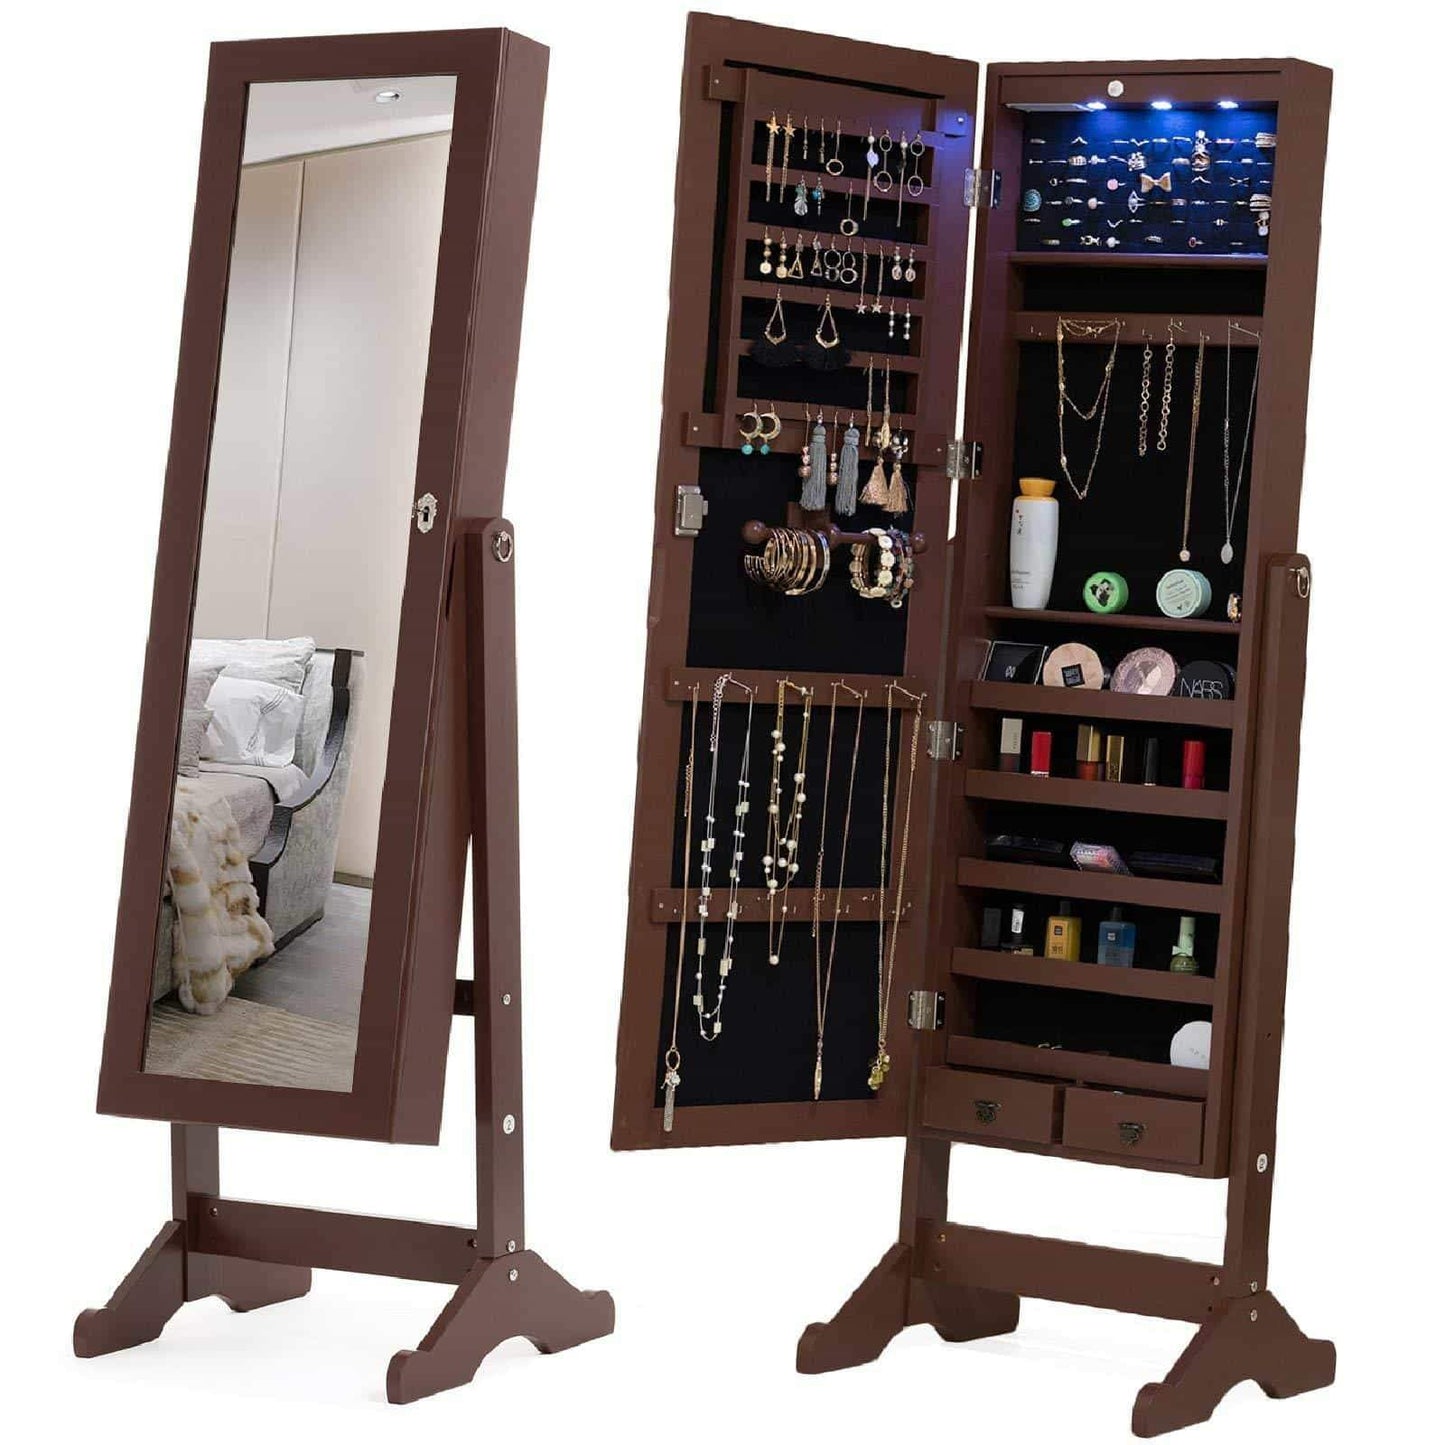 Top mecor jewelry armoire led standing mirrored jewelry cabinet organizer storage lockable full length mirror makeup box w 2 drawers 5 shelves 3 adjustable angle brown